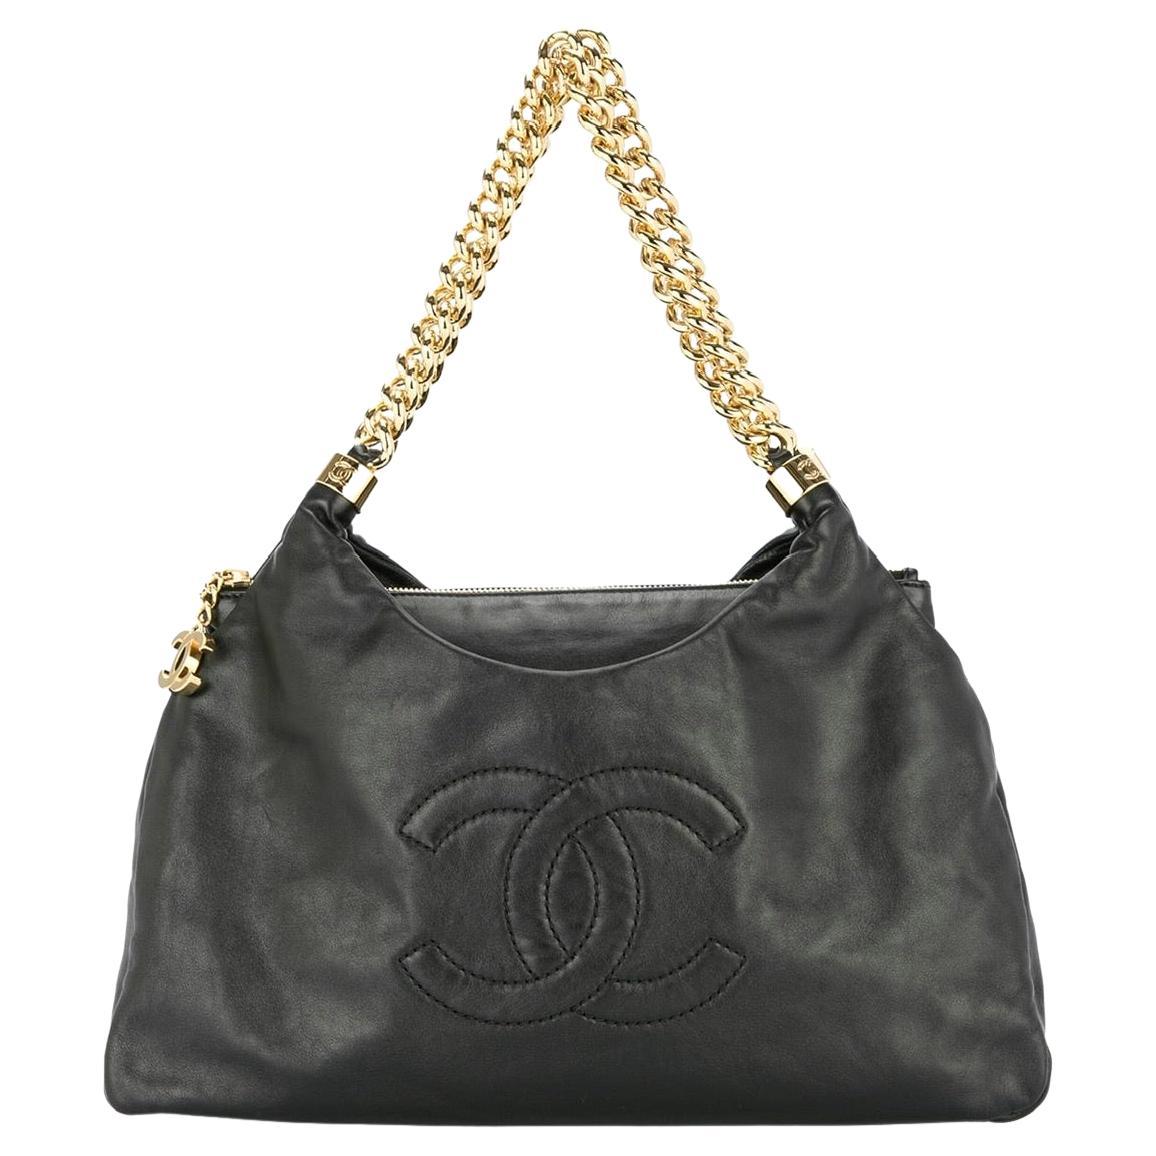 Chanel Rare Jumbo Hobo Limited Edition Mesh Chain Quilted Black